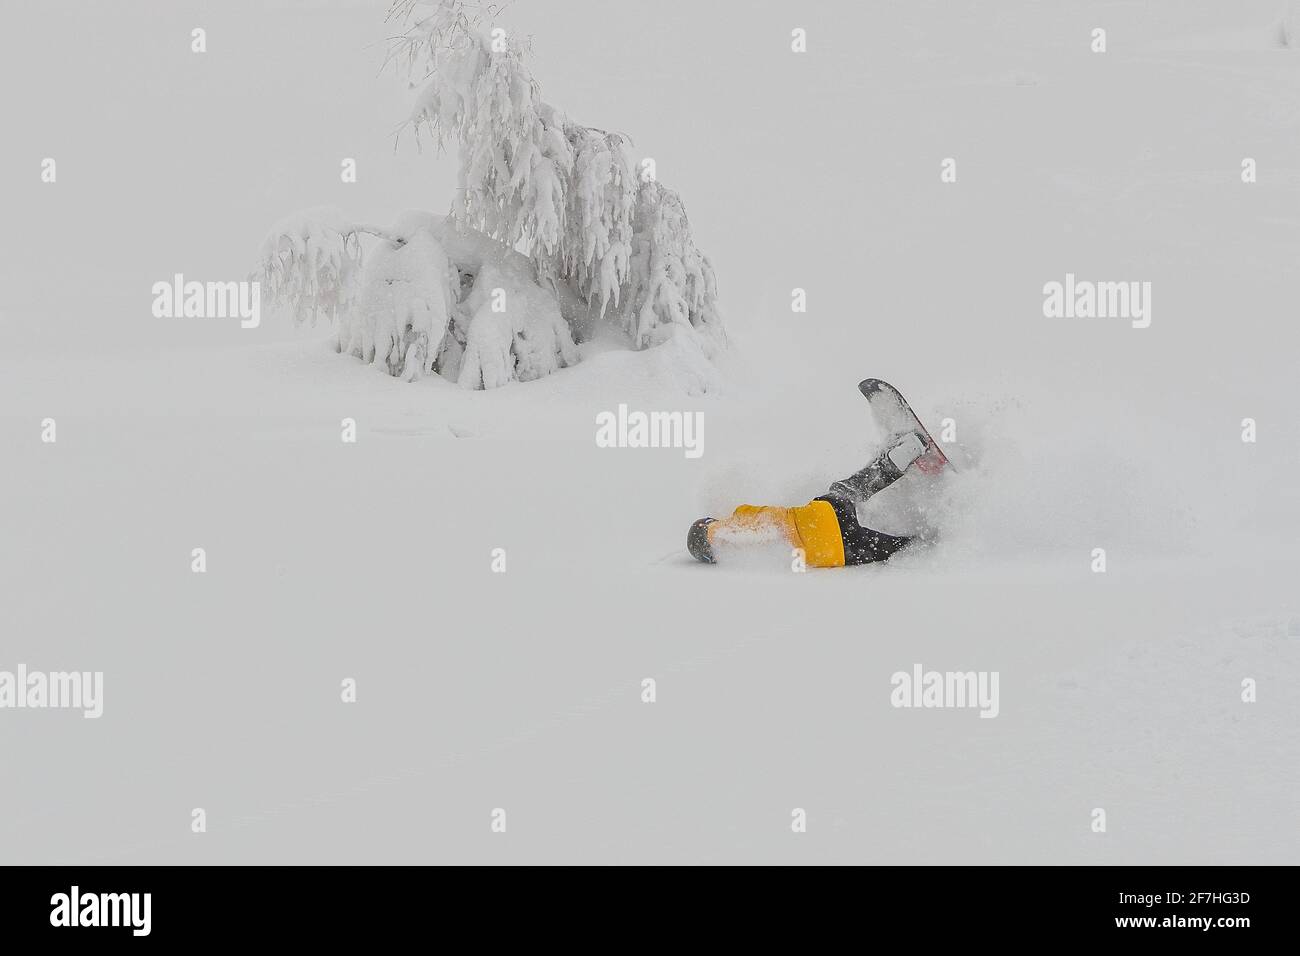 A snowboarder in powder snow about to crash in a curve. Boarder with yellow clothing with black trousers and orange board falling in deep powder on a Stock Photo